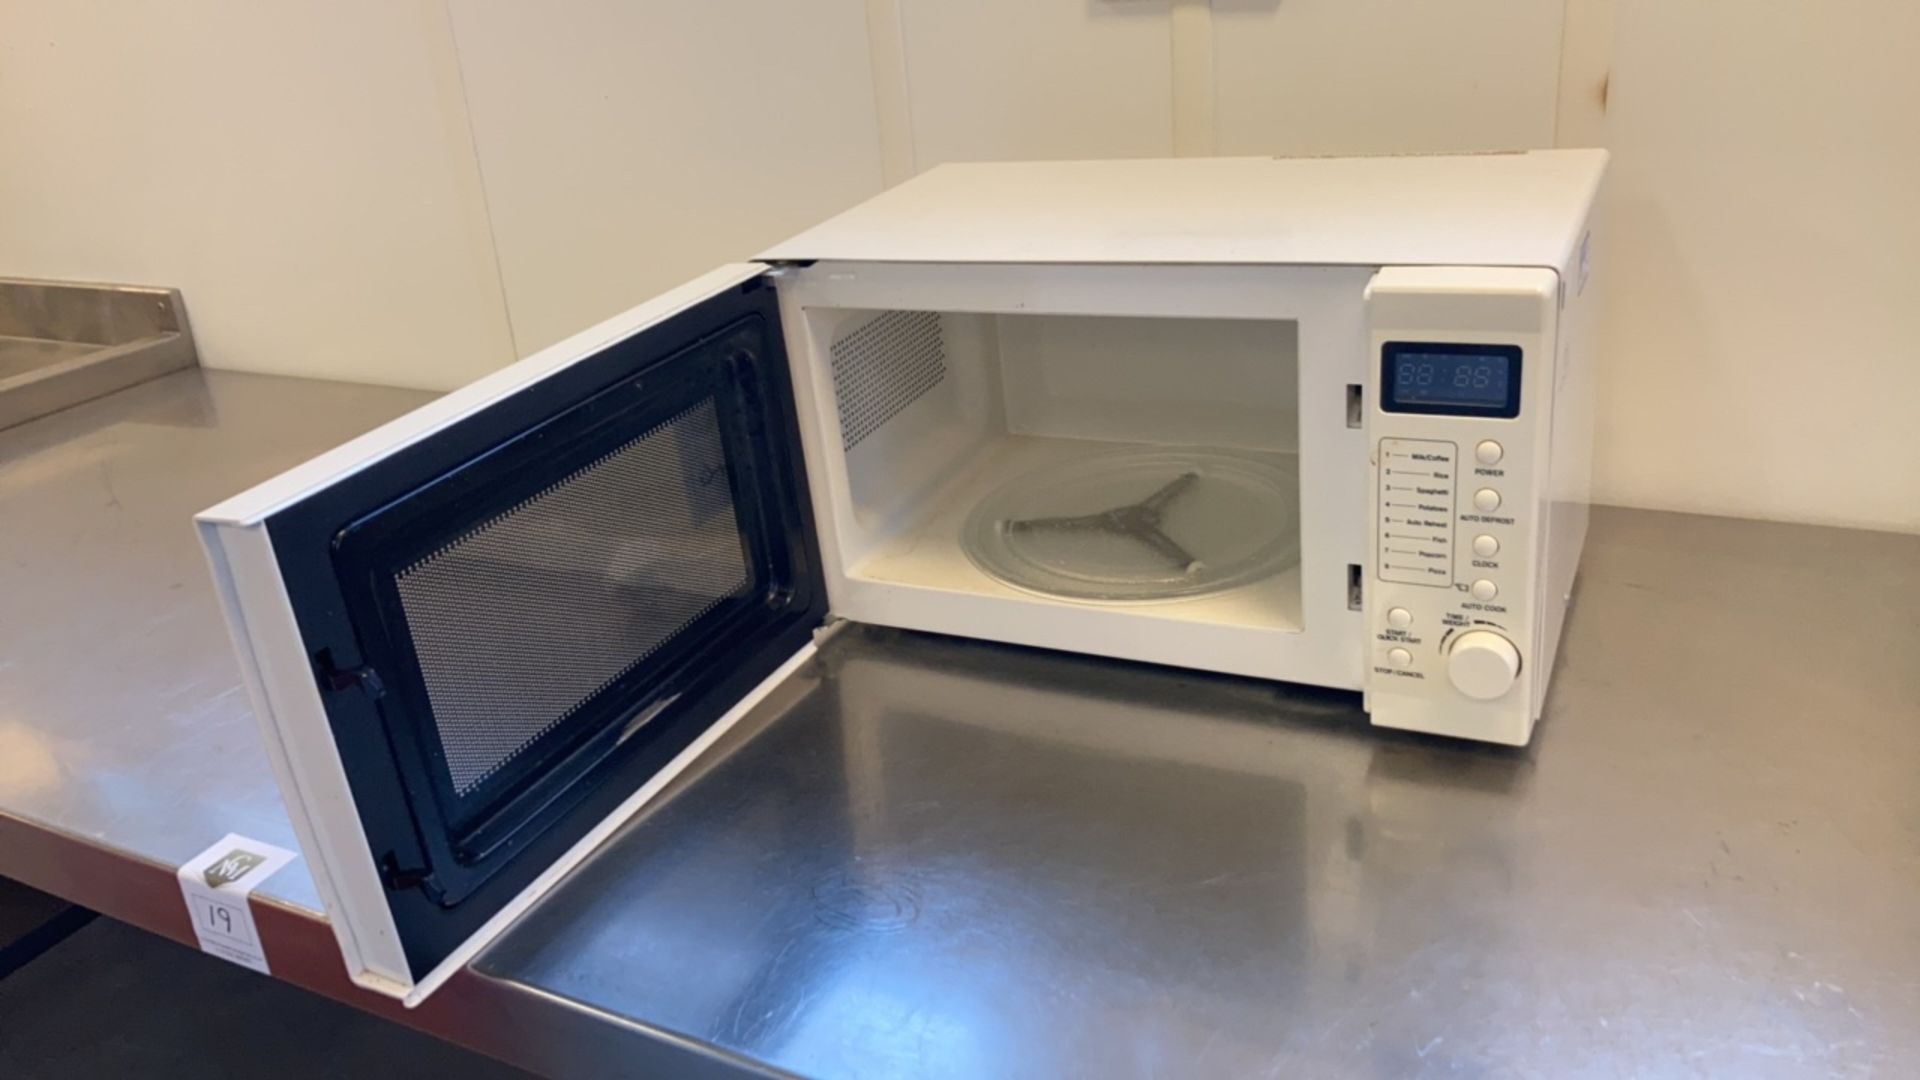 Microwave oven - Image 2 of 4